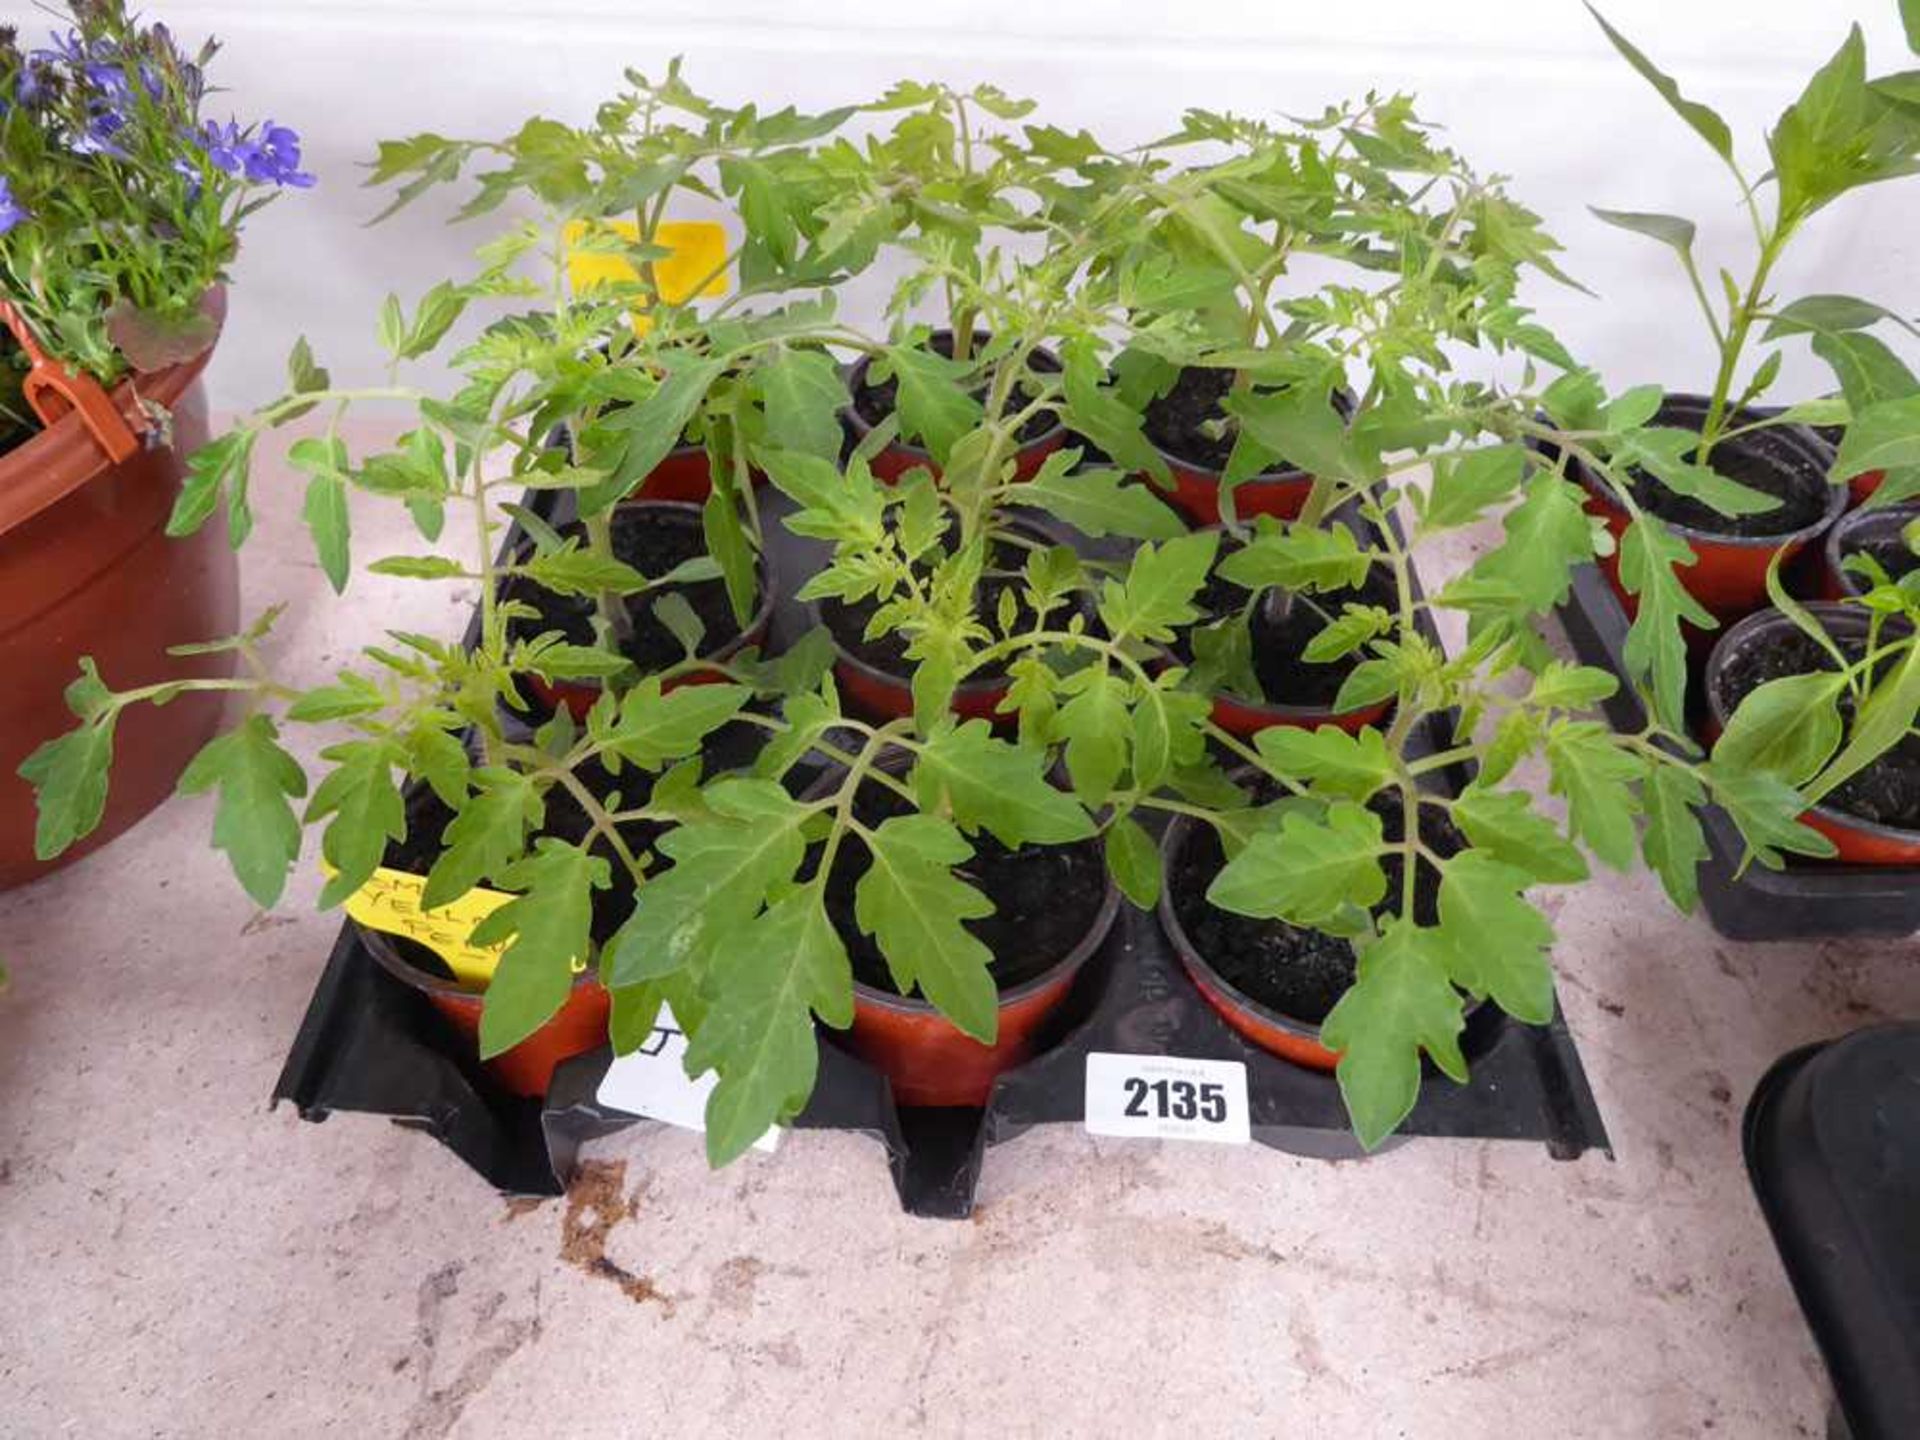 Tray containing 9 pots of Yellow Pear tomato plants